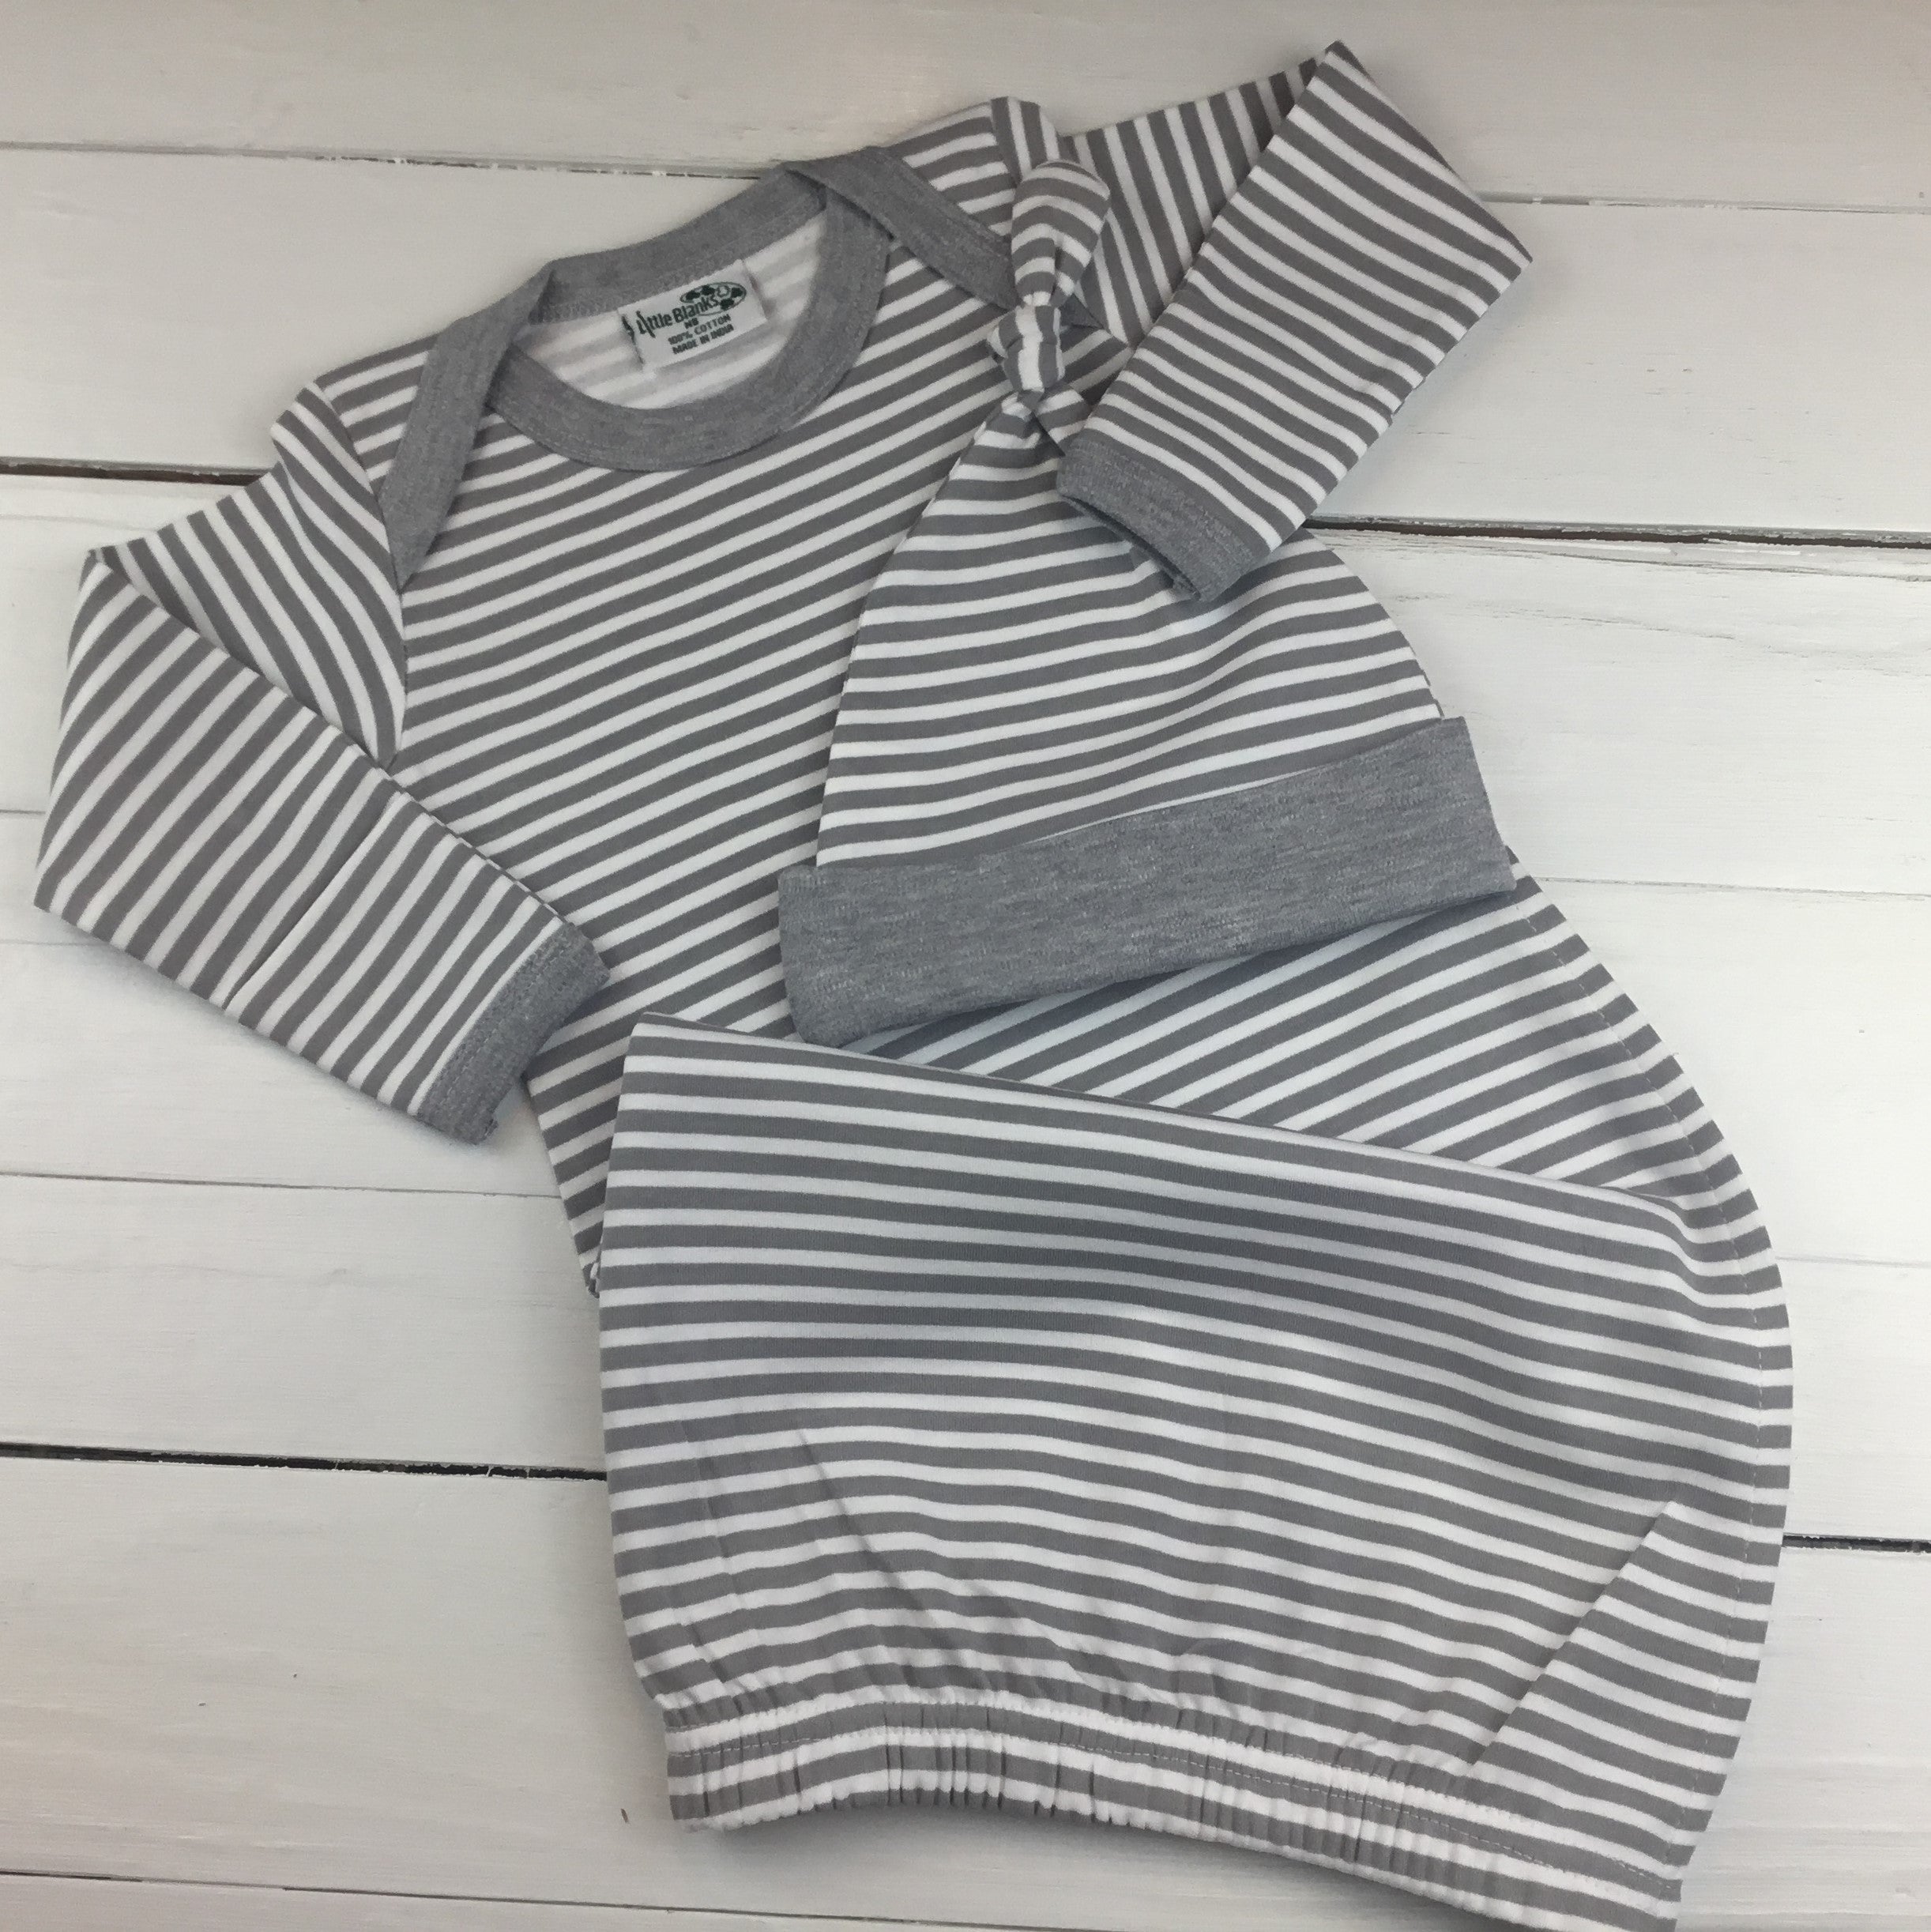 Shop Baby Boy Clothes | Onesies®, Pajamas, Outfit Sets & More – Gerber  Childrenswear